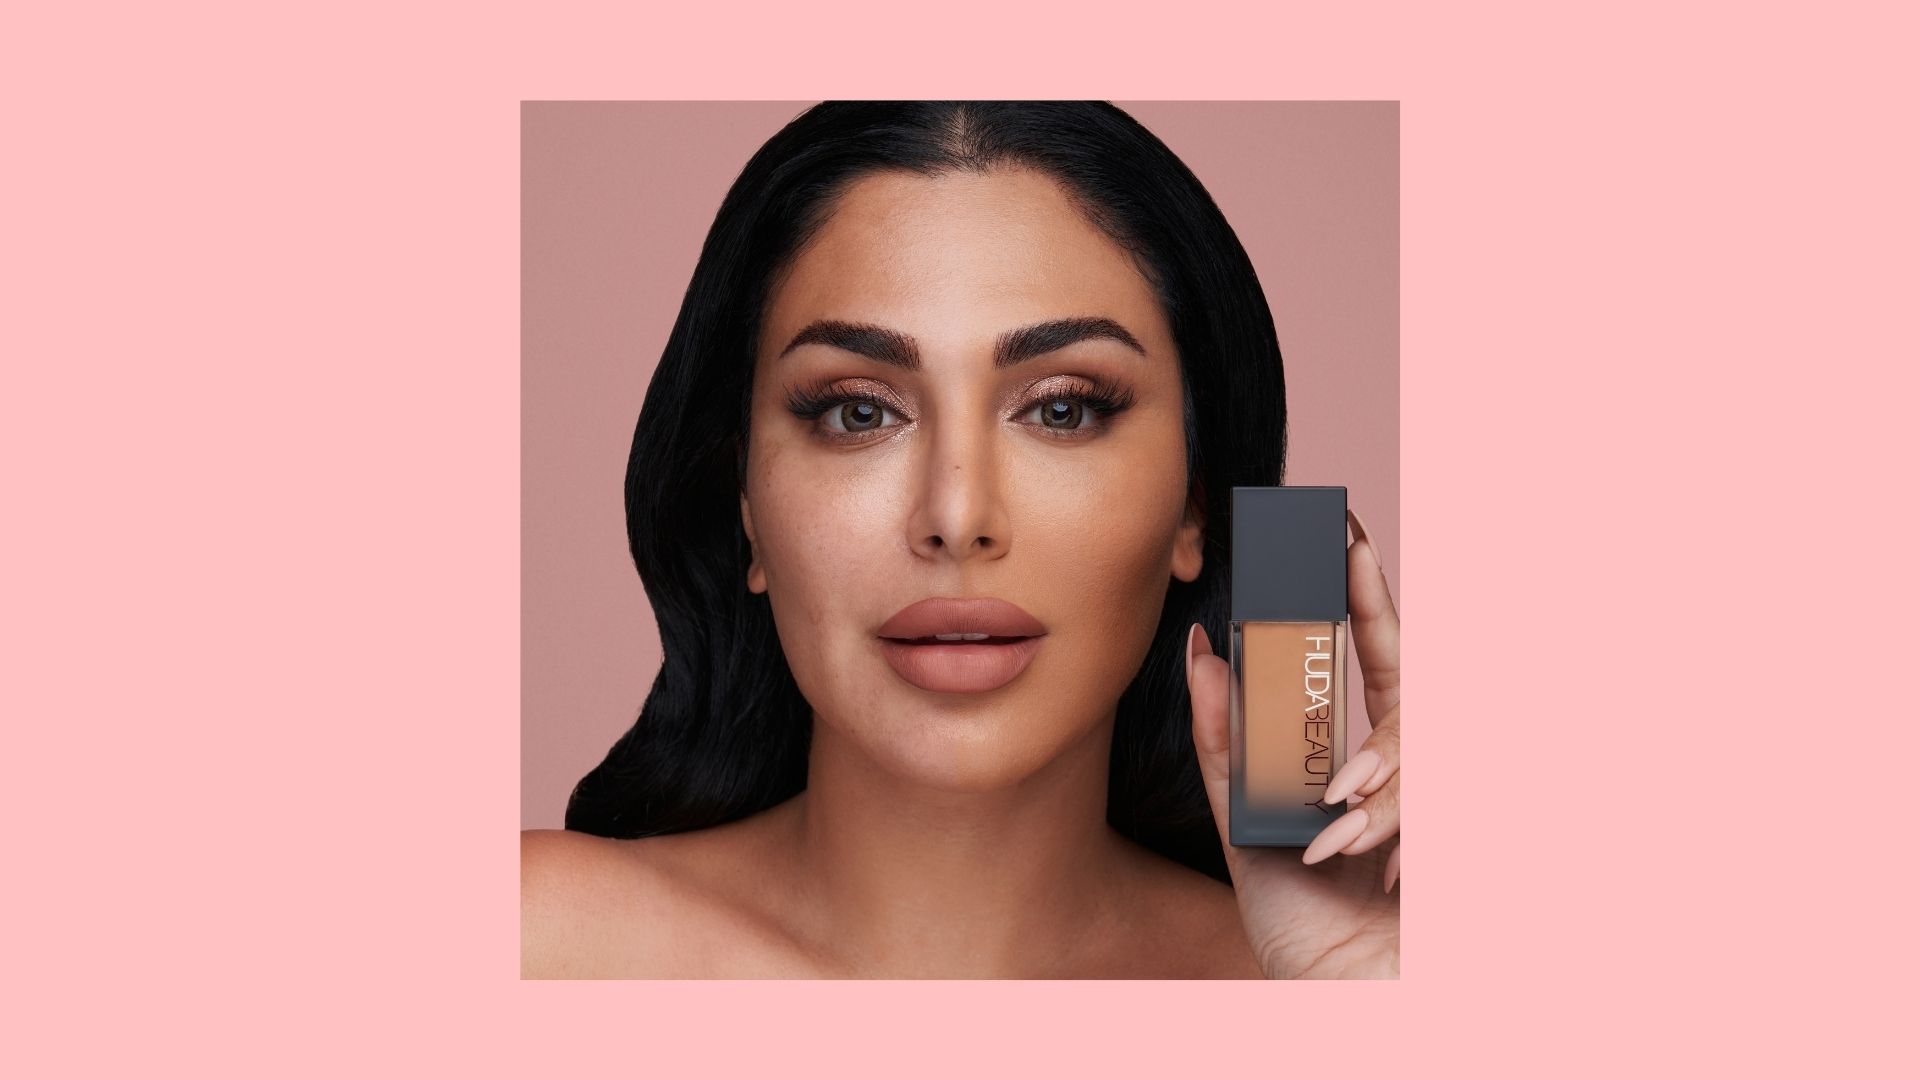 Huda Beauty's updated version of their #FauxFilter Foundation is coming ...